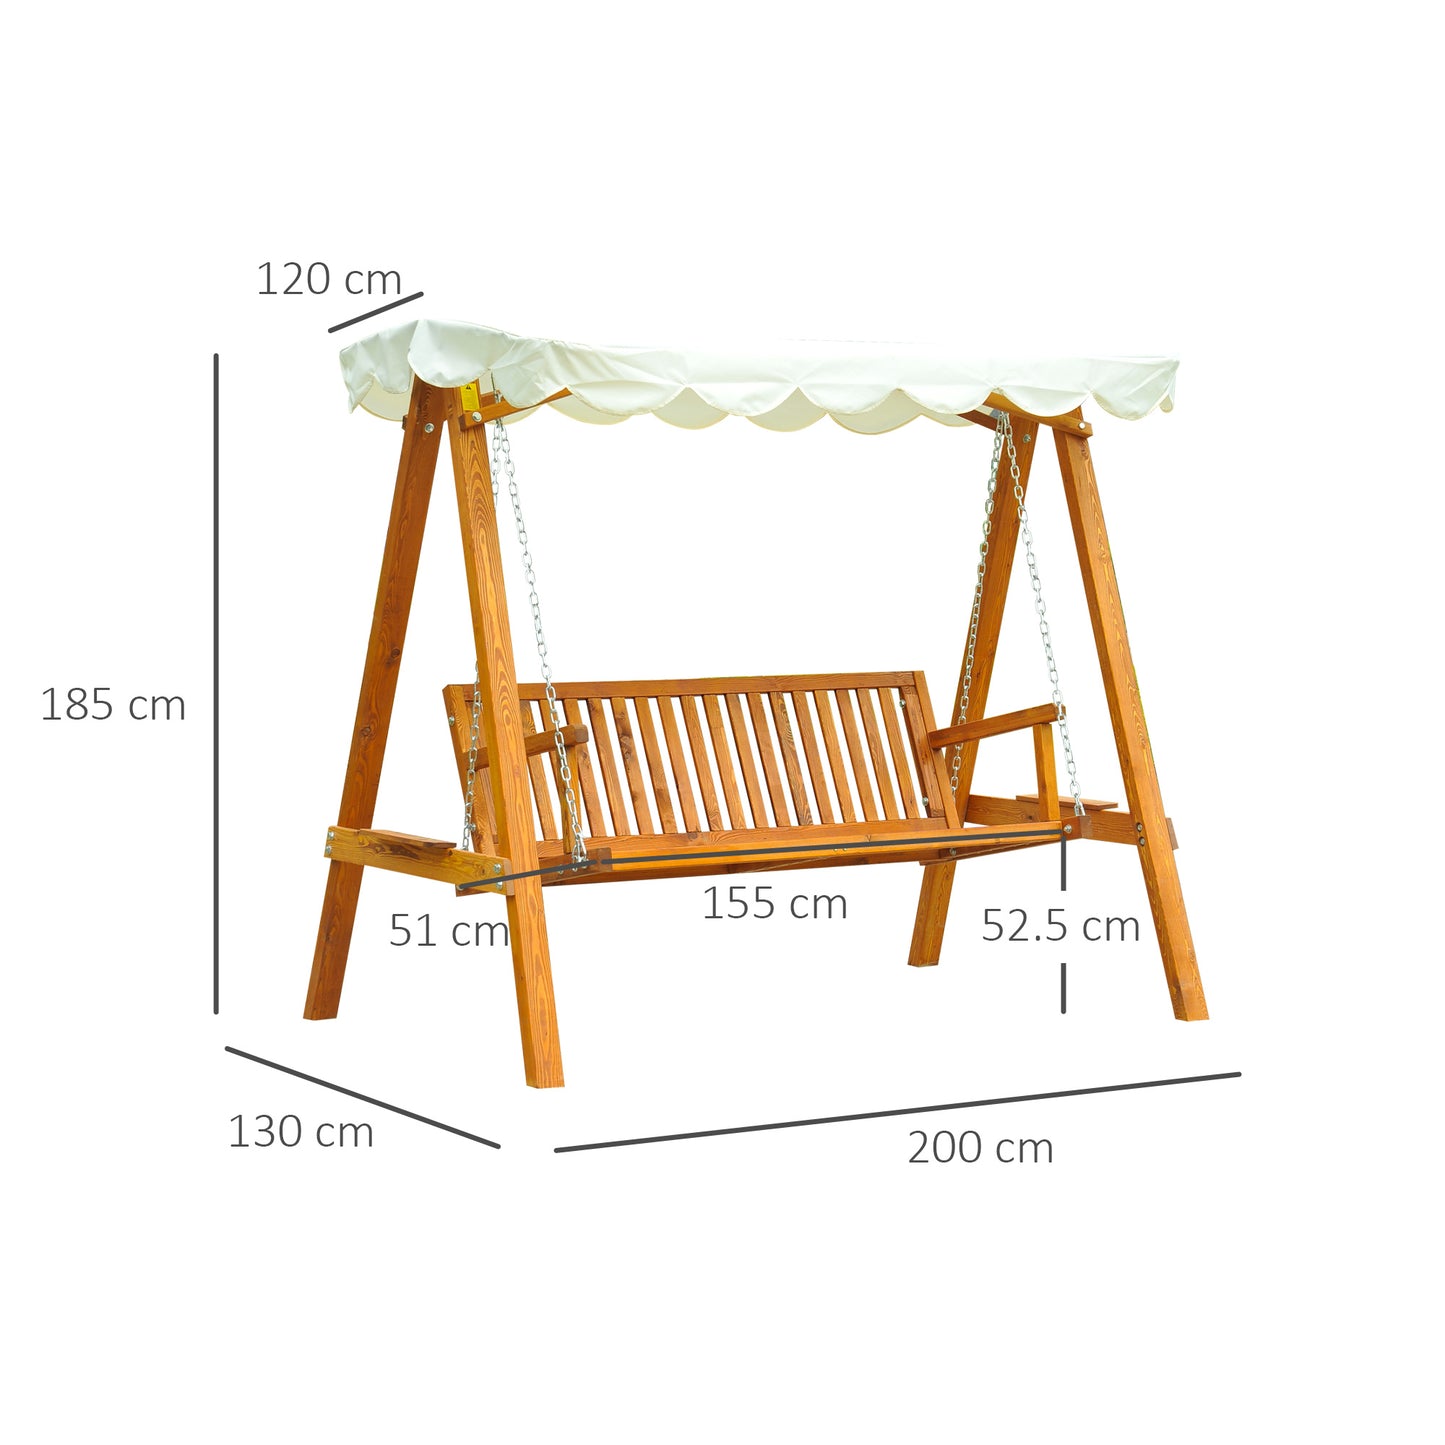 Outsunny 3-Seater Wooden Garden Swing Chair Seat Bench-Cream